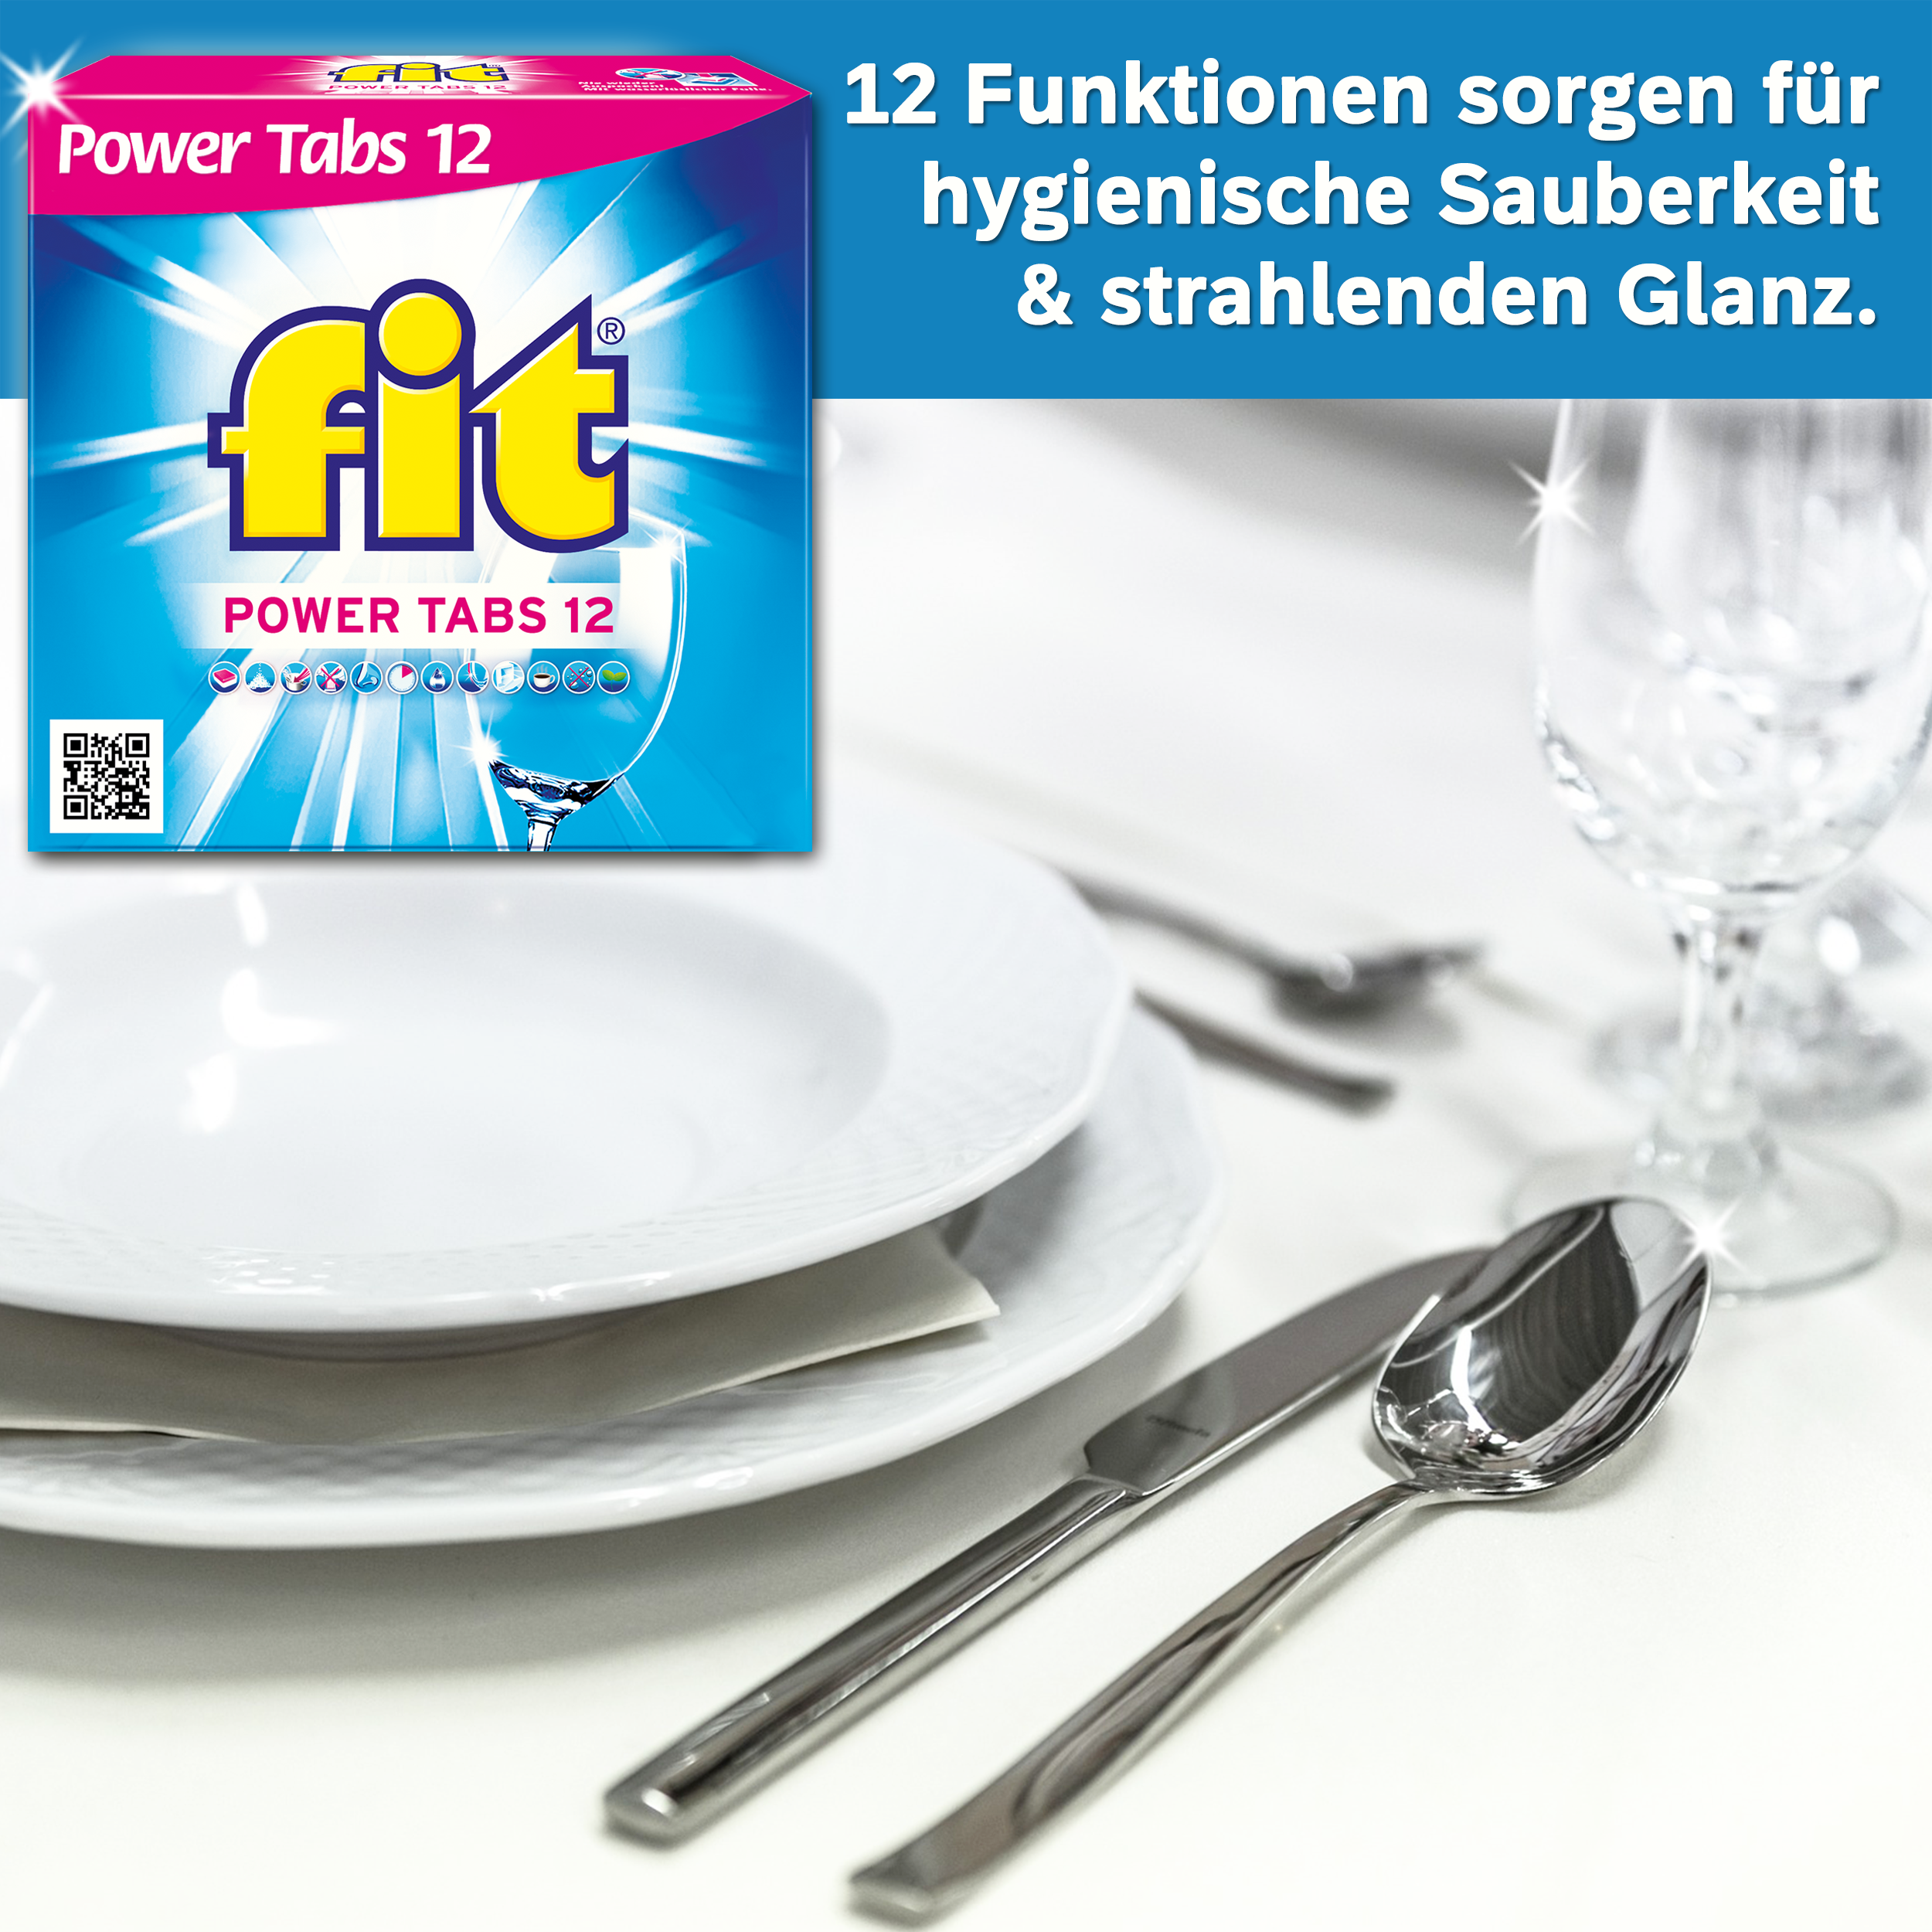 fit Power Tabs 12